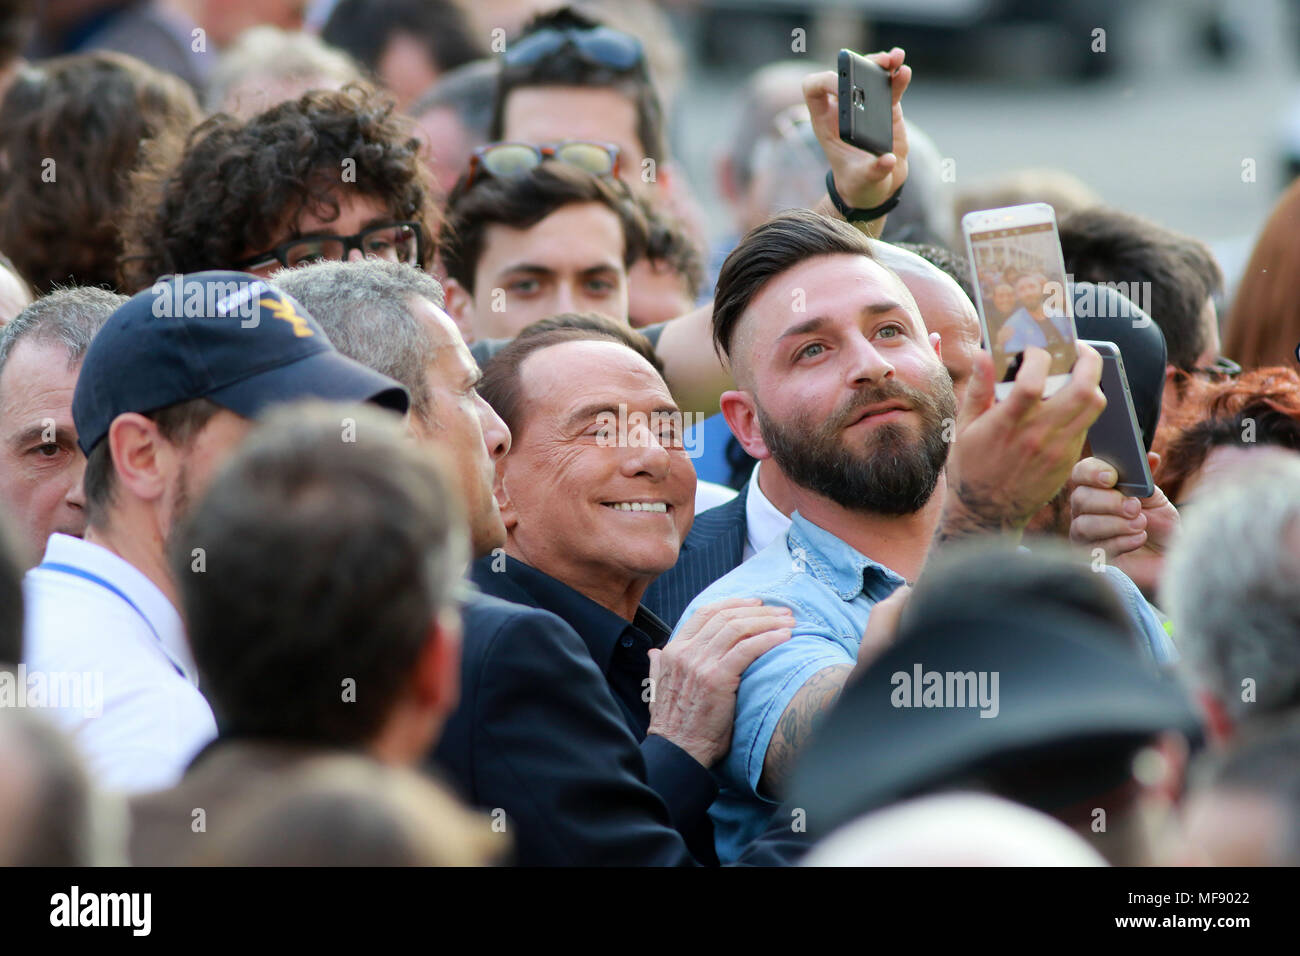 Pordenone, Italy. 24th April 2018. ITALY, Pordenone: Silvio Berlusconi, leader of the Forza Italia party, makes a selfie with fan during electoral campaign for the upcoming regional election in visit to Friuli Venezia Giulia Region on 24th April, 2018. Credit: Andrea Spinelli/Alamy Live News Stock Photo